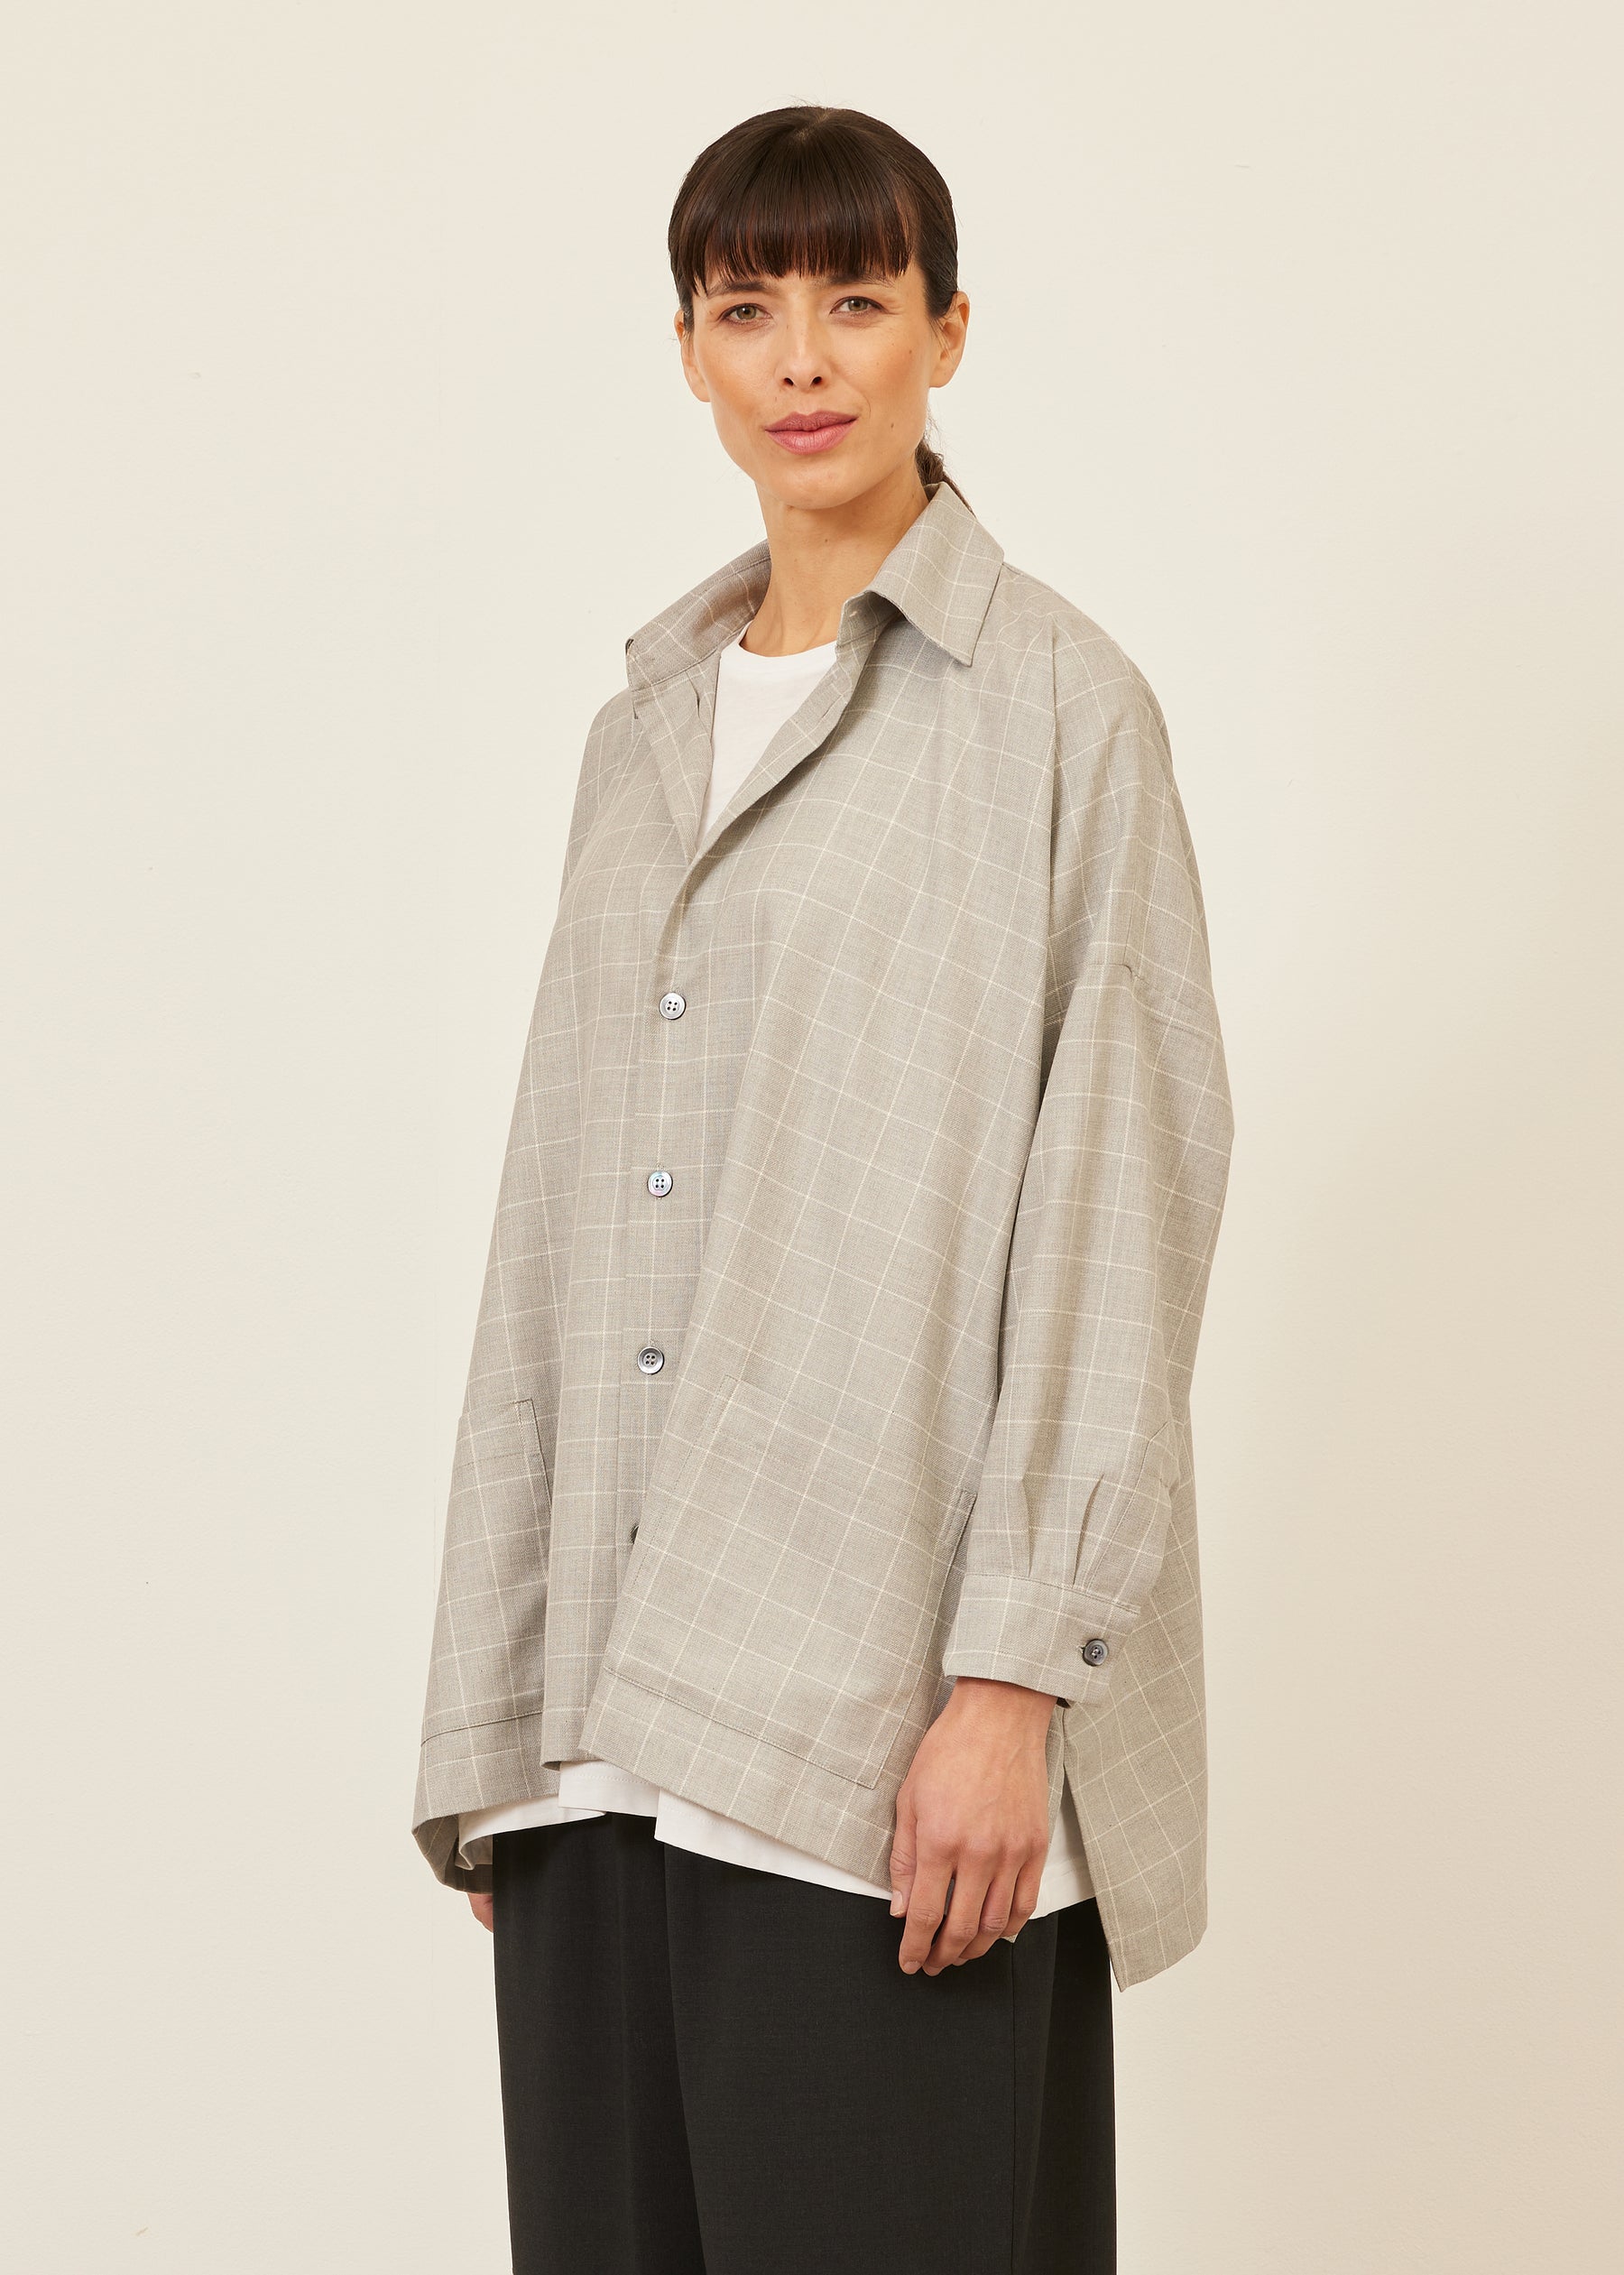 wide longer back shirt jacket with collar - long